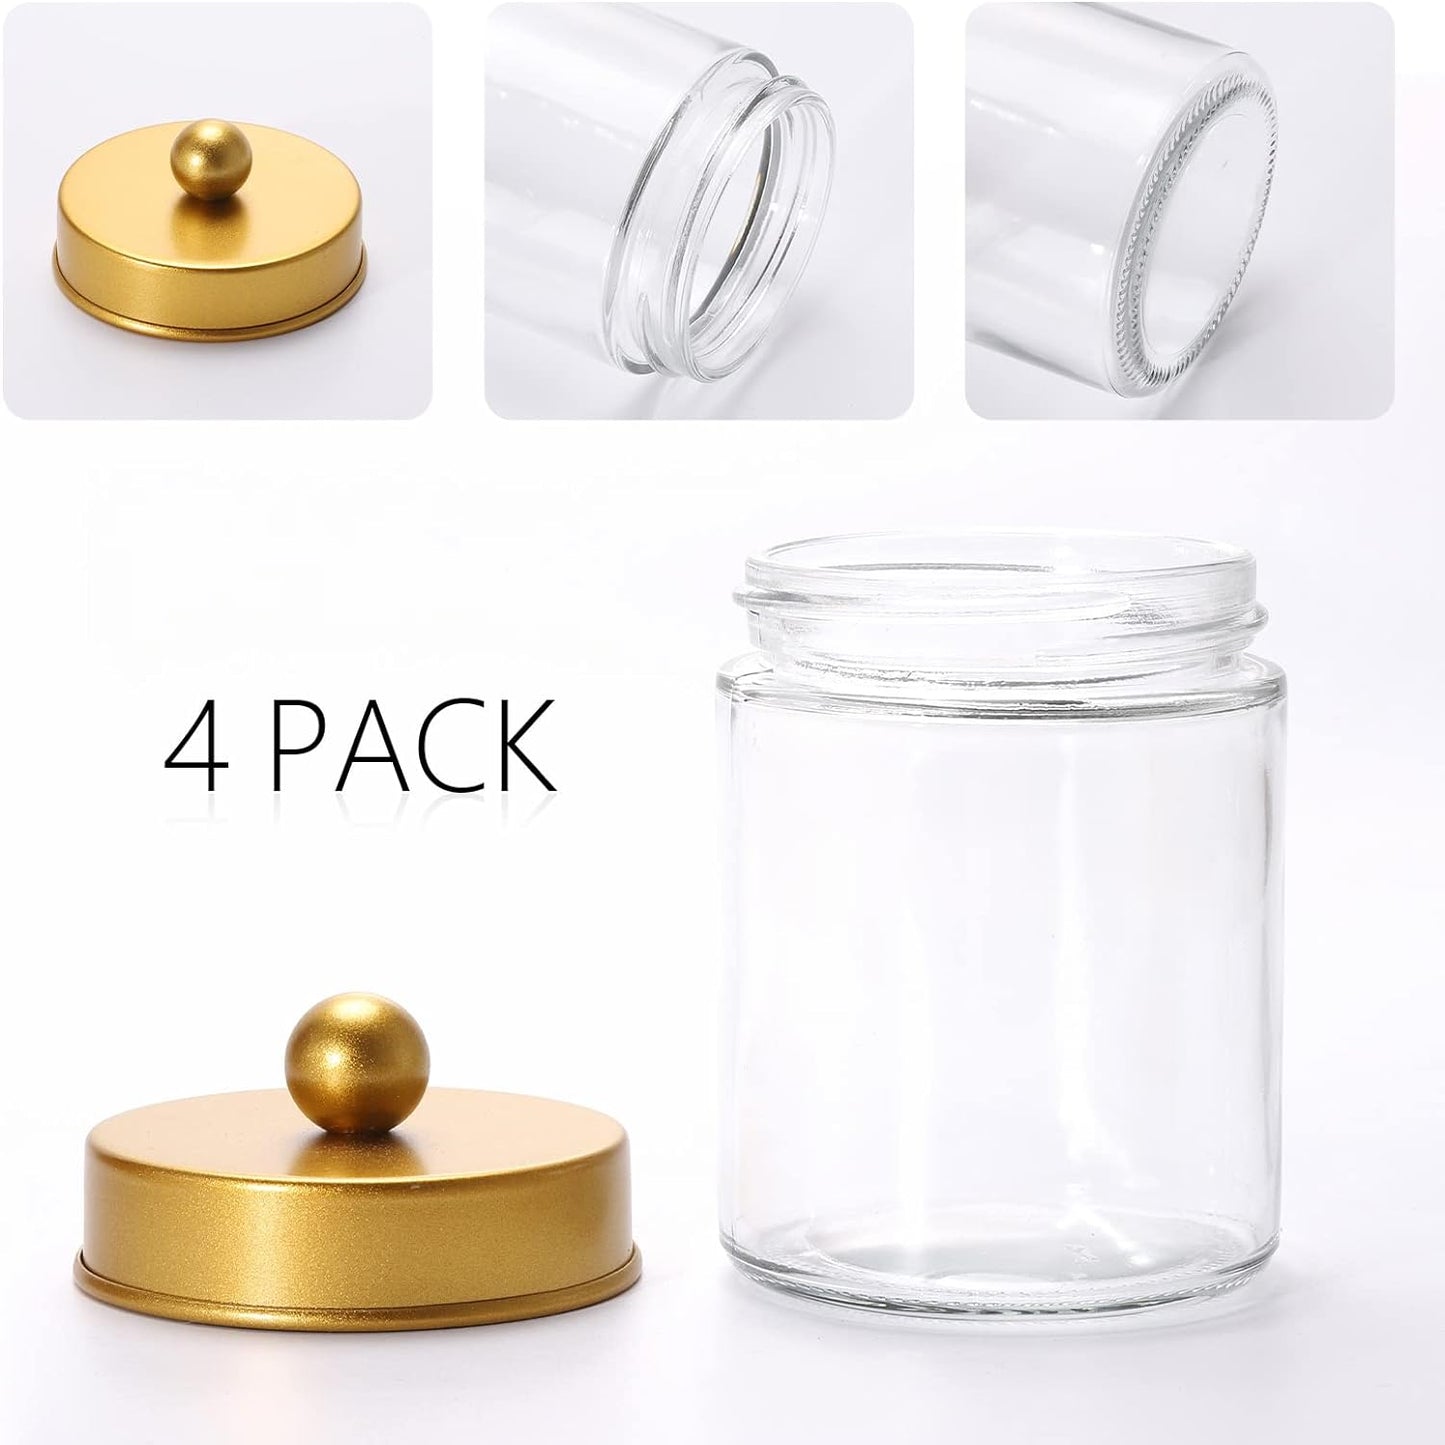 Tbestmax 4 Pack Glass Qtip Holder Dispenser, 10-Ounce Restroom Bathroom Organizers and Storage Containers, Apothecary Jars with Metal Lids for Cotton Ball Swab Pad, Gold